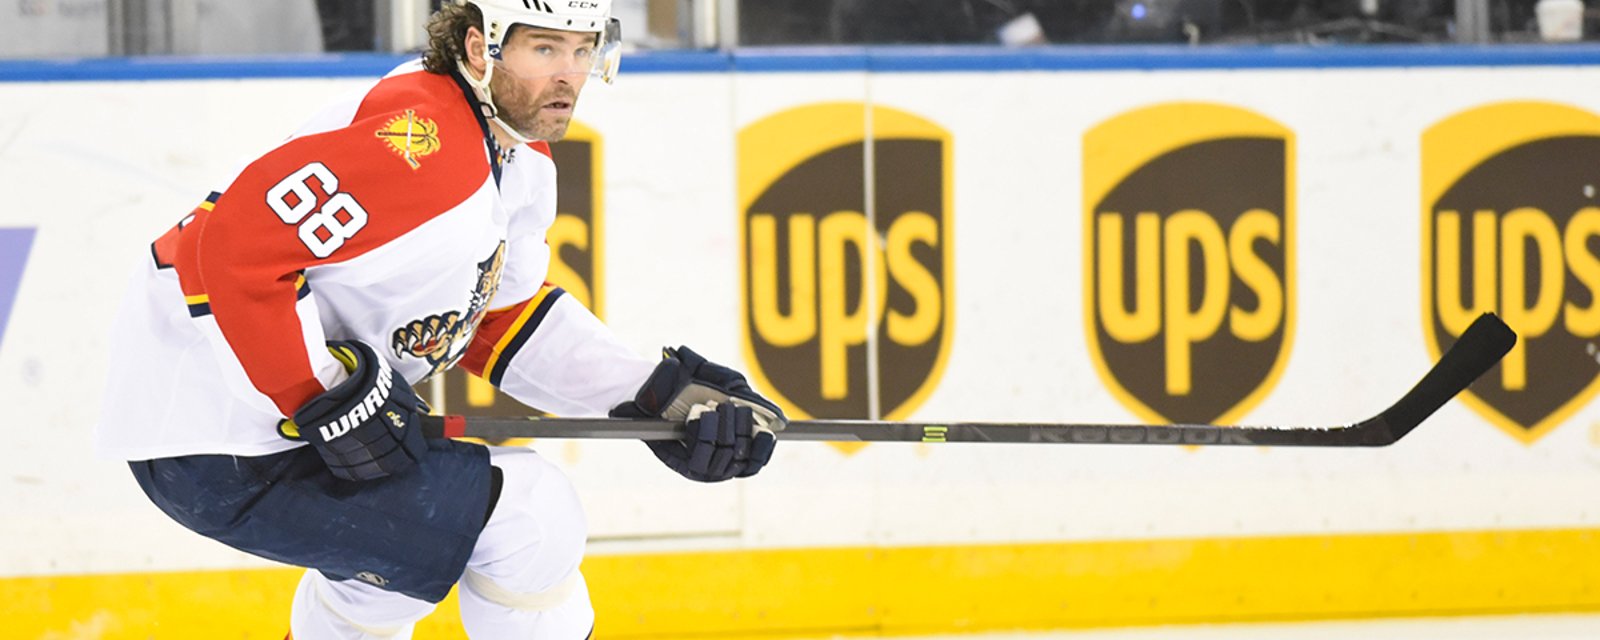 Insider Report: NHL GM admits to Jagr discussions